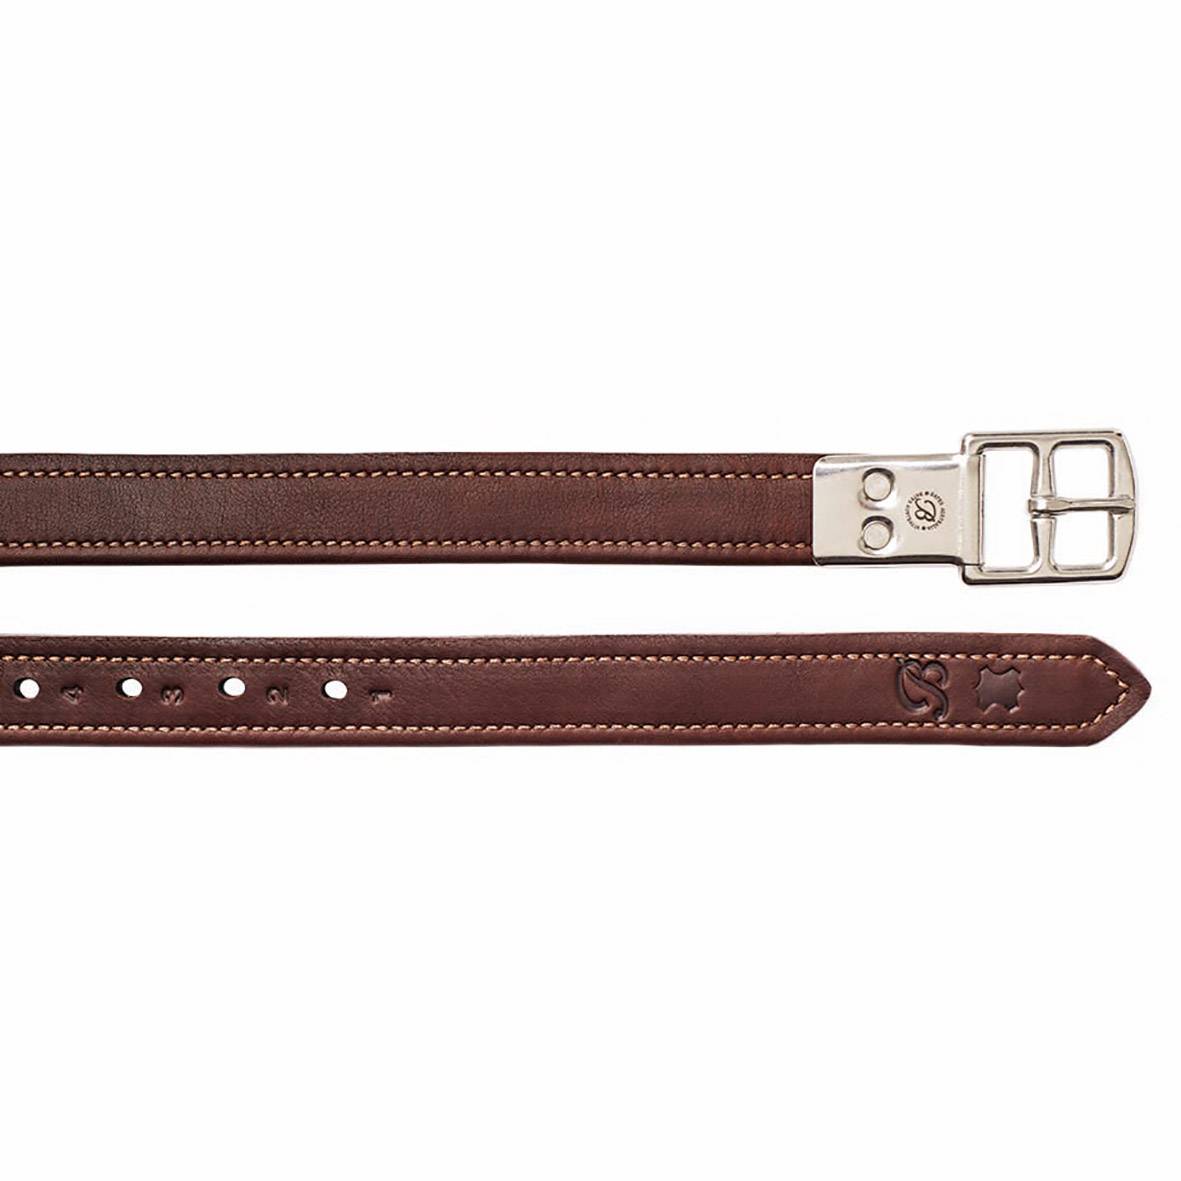 Bates Stirrup Leathers Luxe